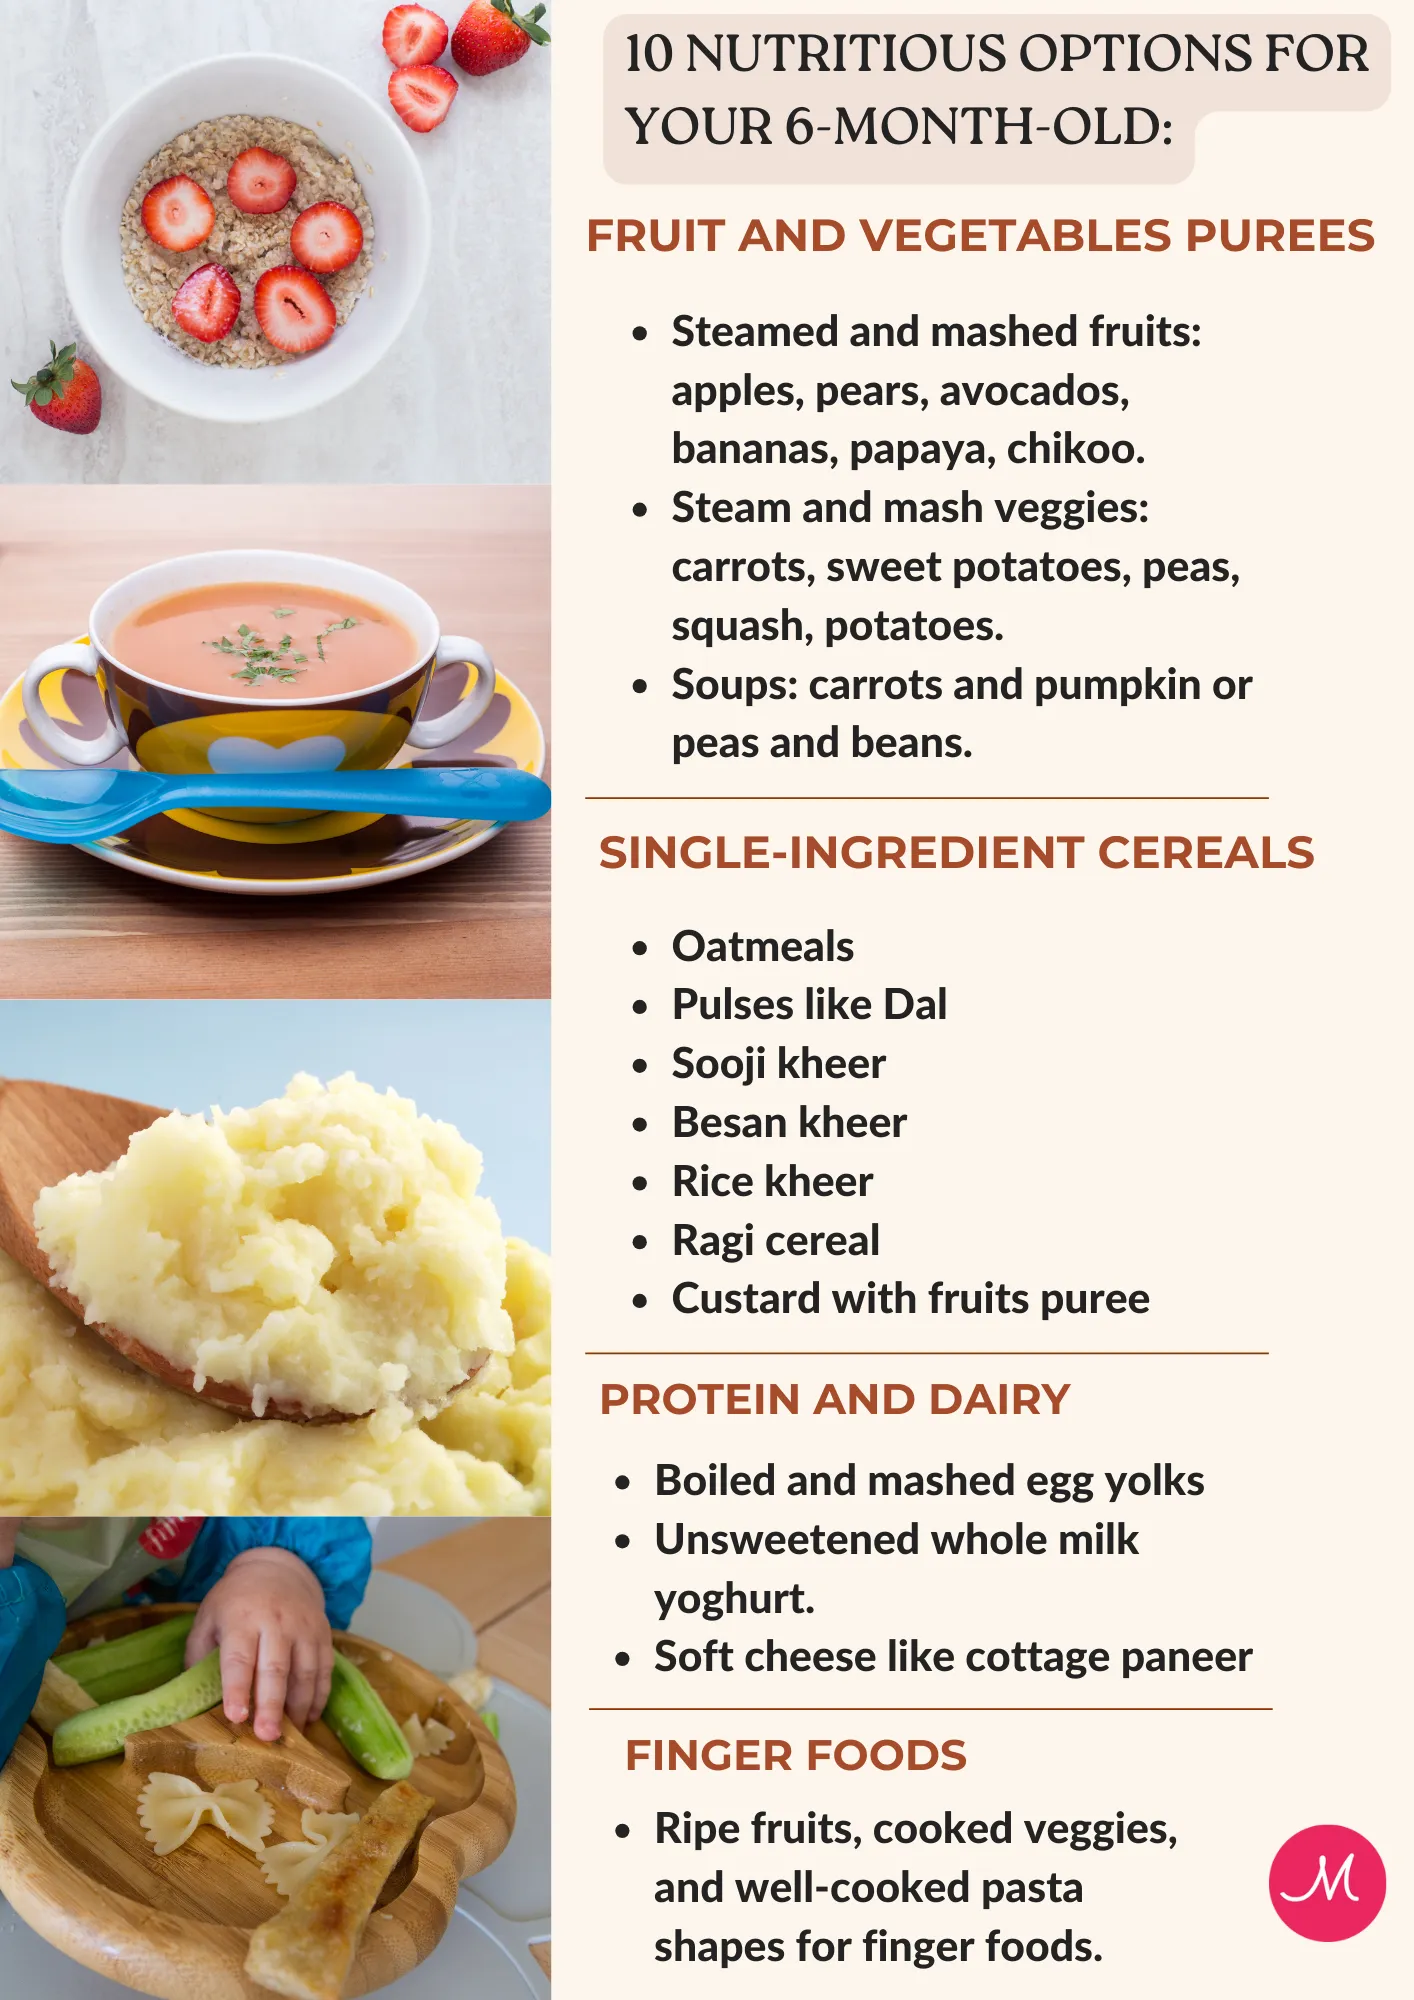 foods for 6 months old baby